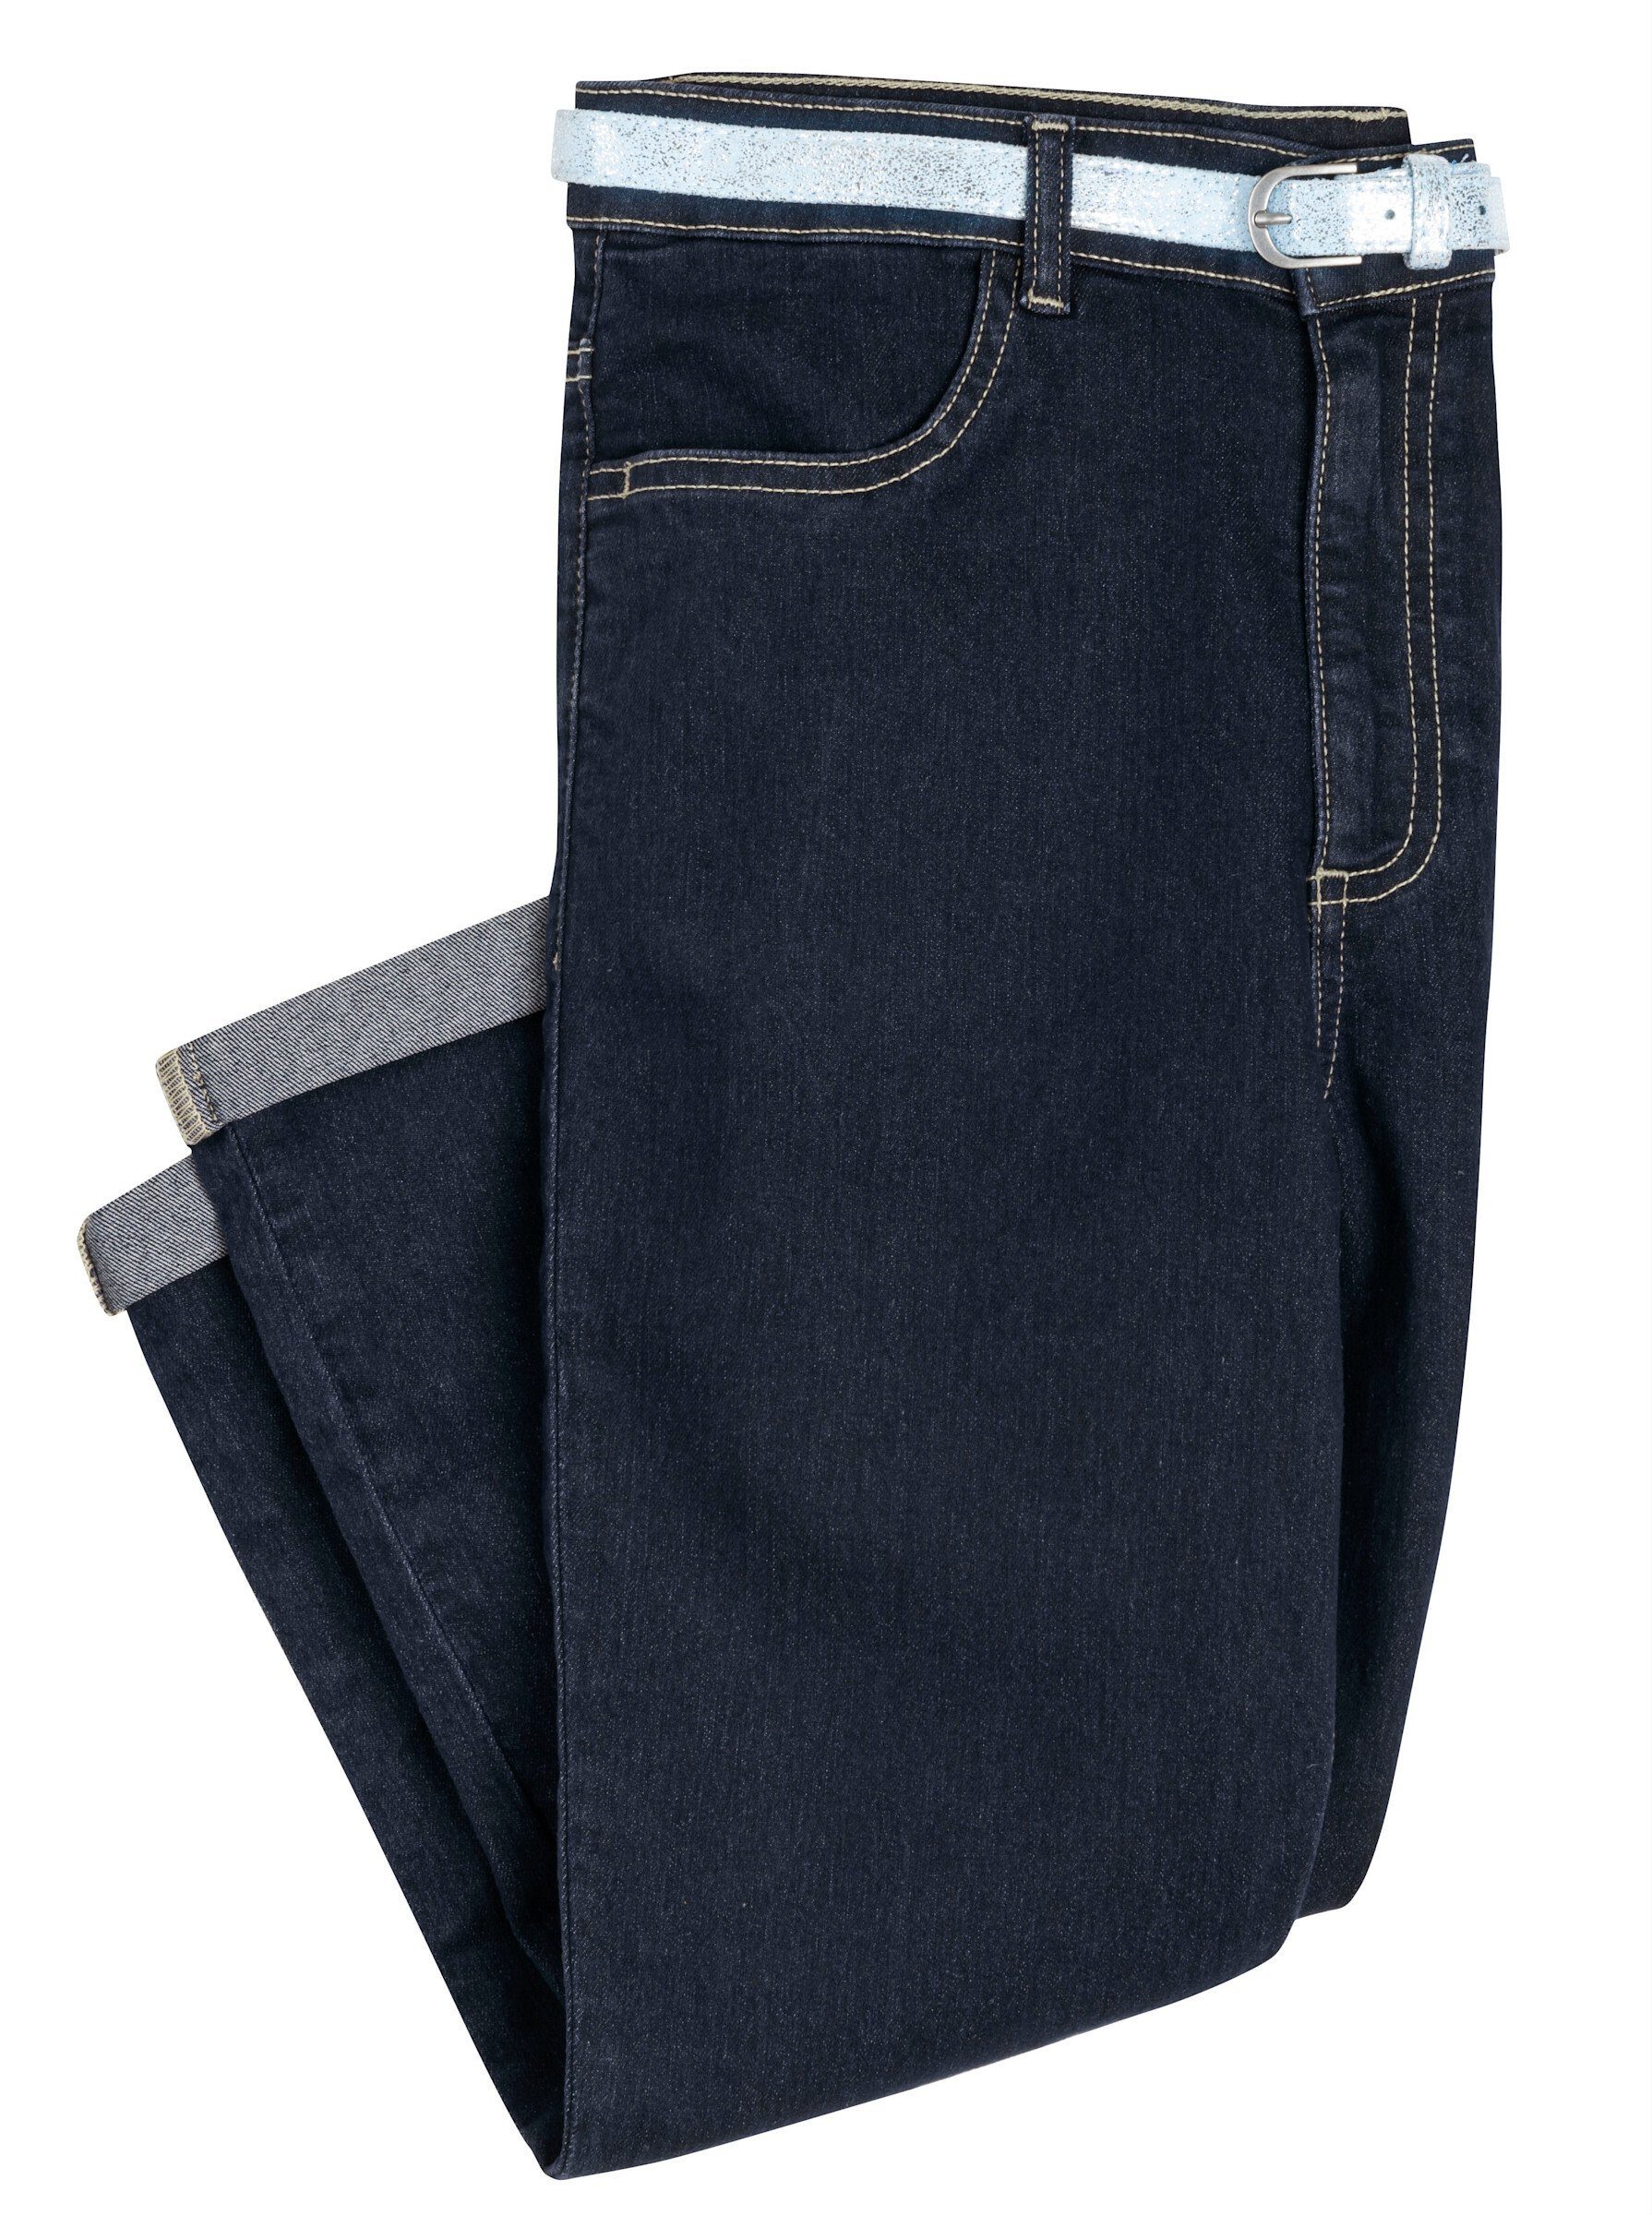 blue-stone-washed Jeansshorts an! Sieh